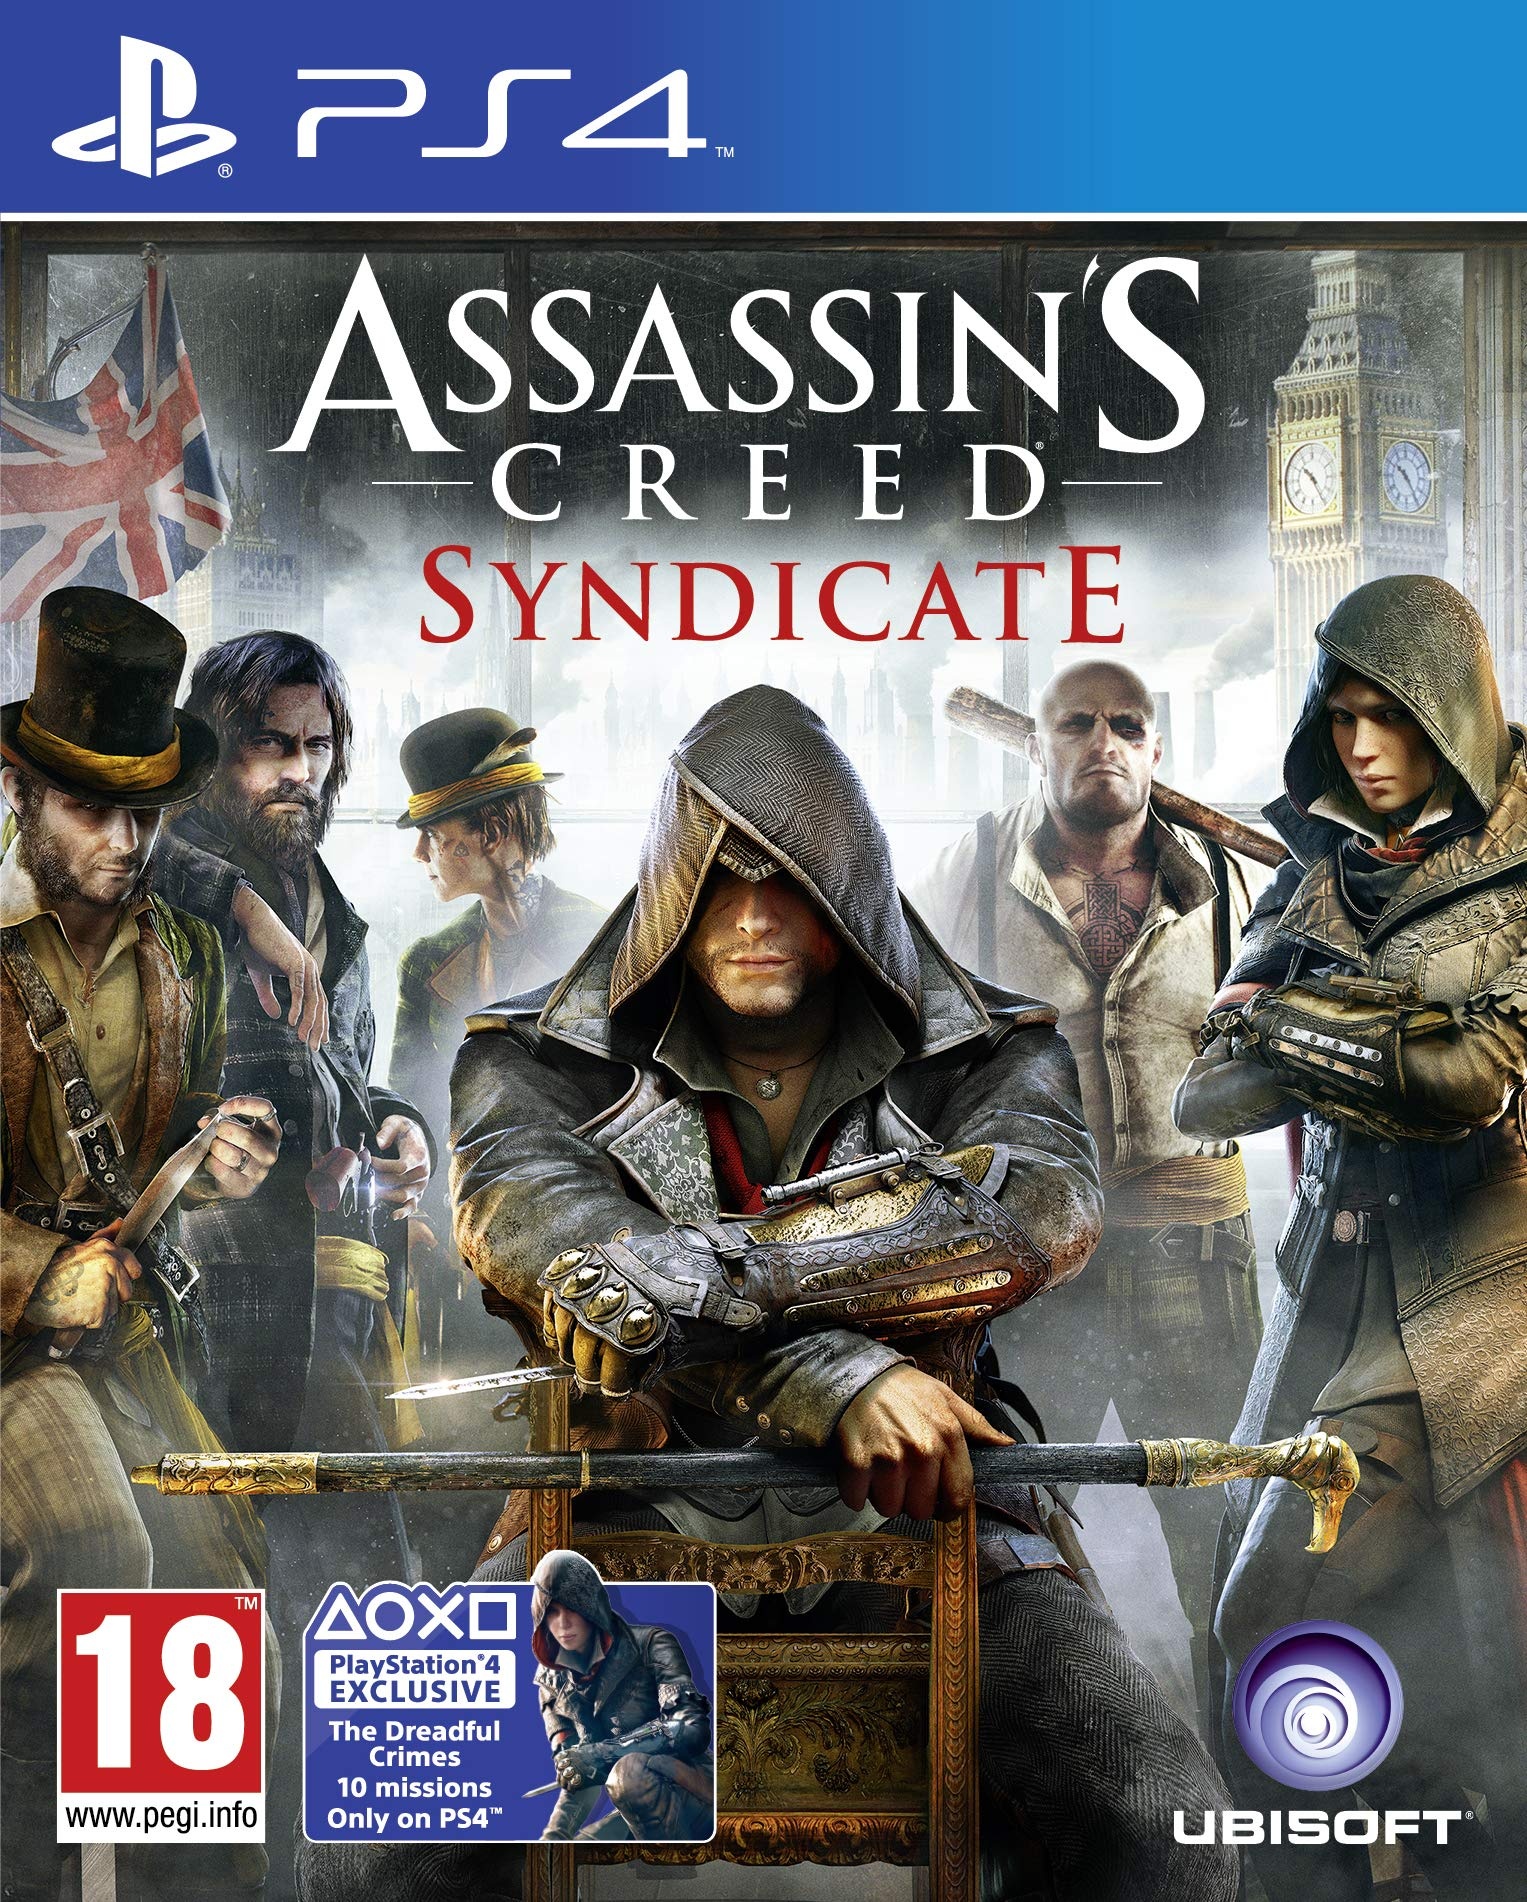 Ubisoft Assassin's Creed Syndicate, PS4 - Videospiele (PS4, PlayStation 4, Action/Abenteuer, DUT, FRE)